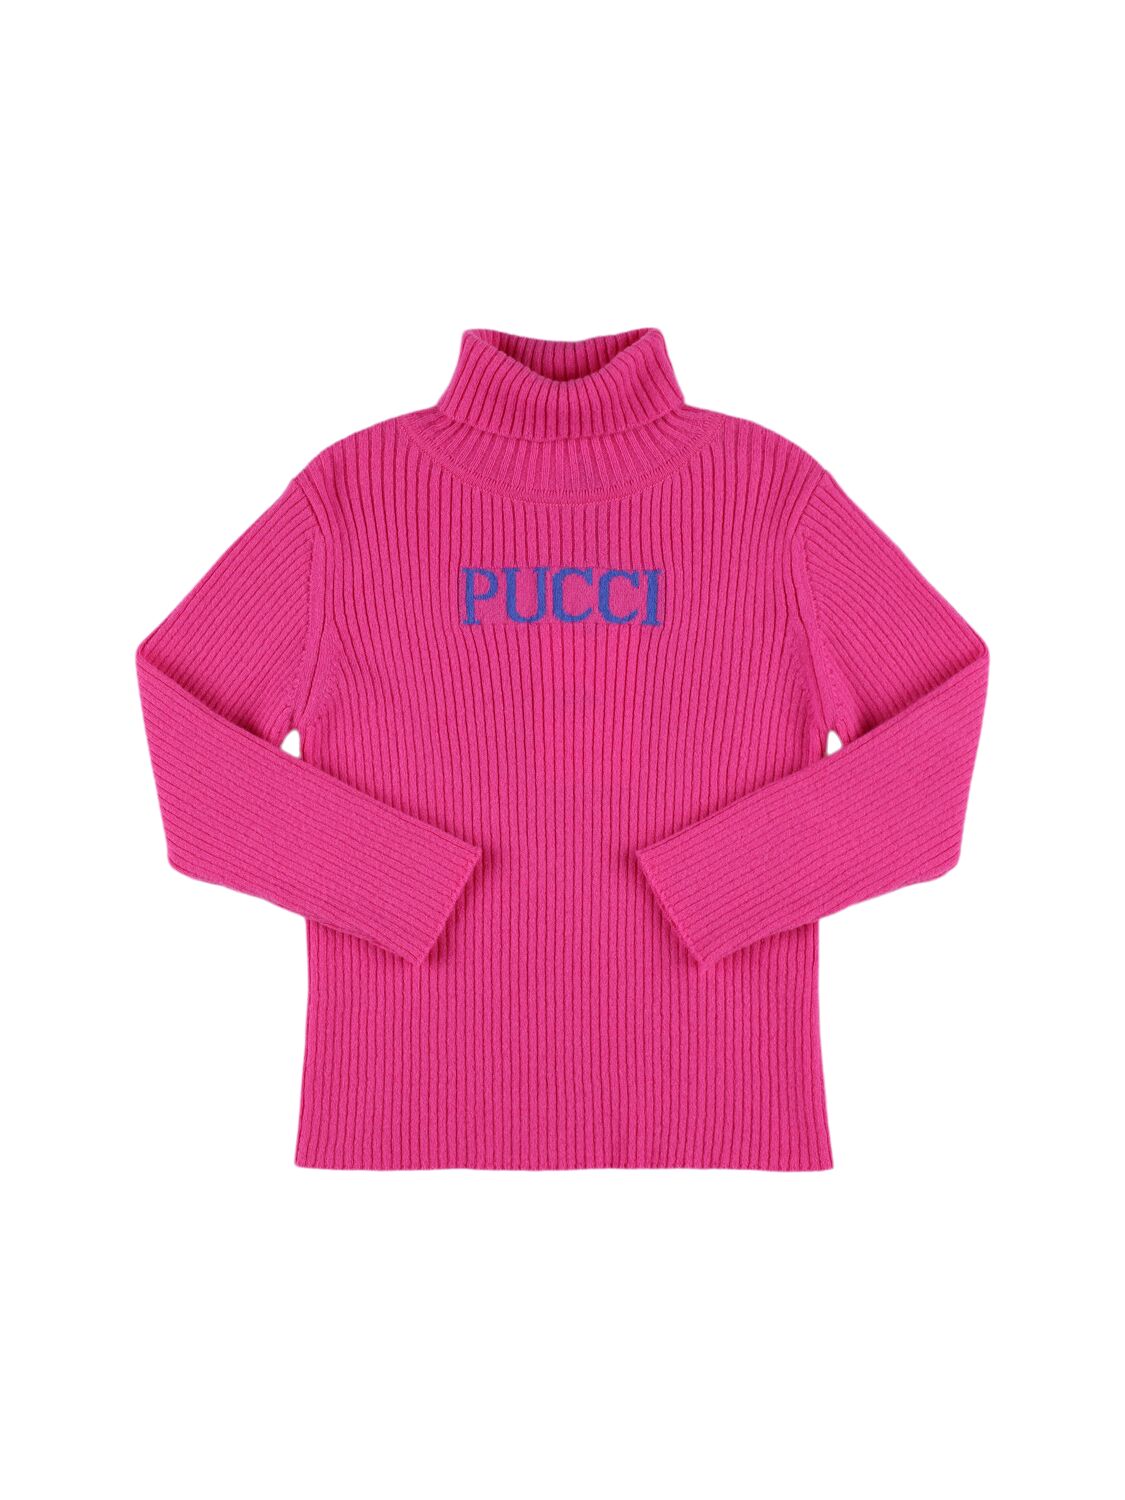 Pucci Wool & Cashmere Knit Turtleneck In Pink